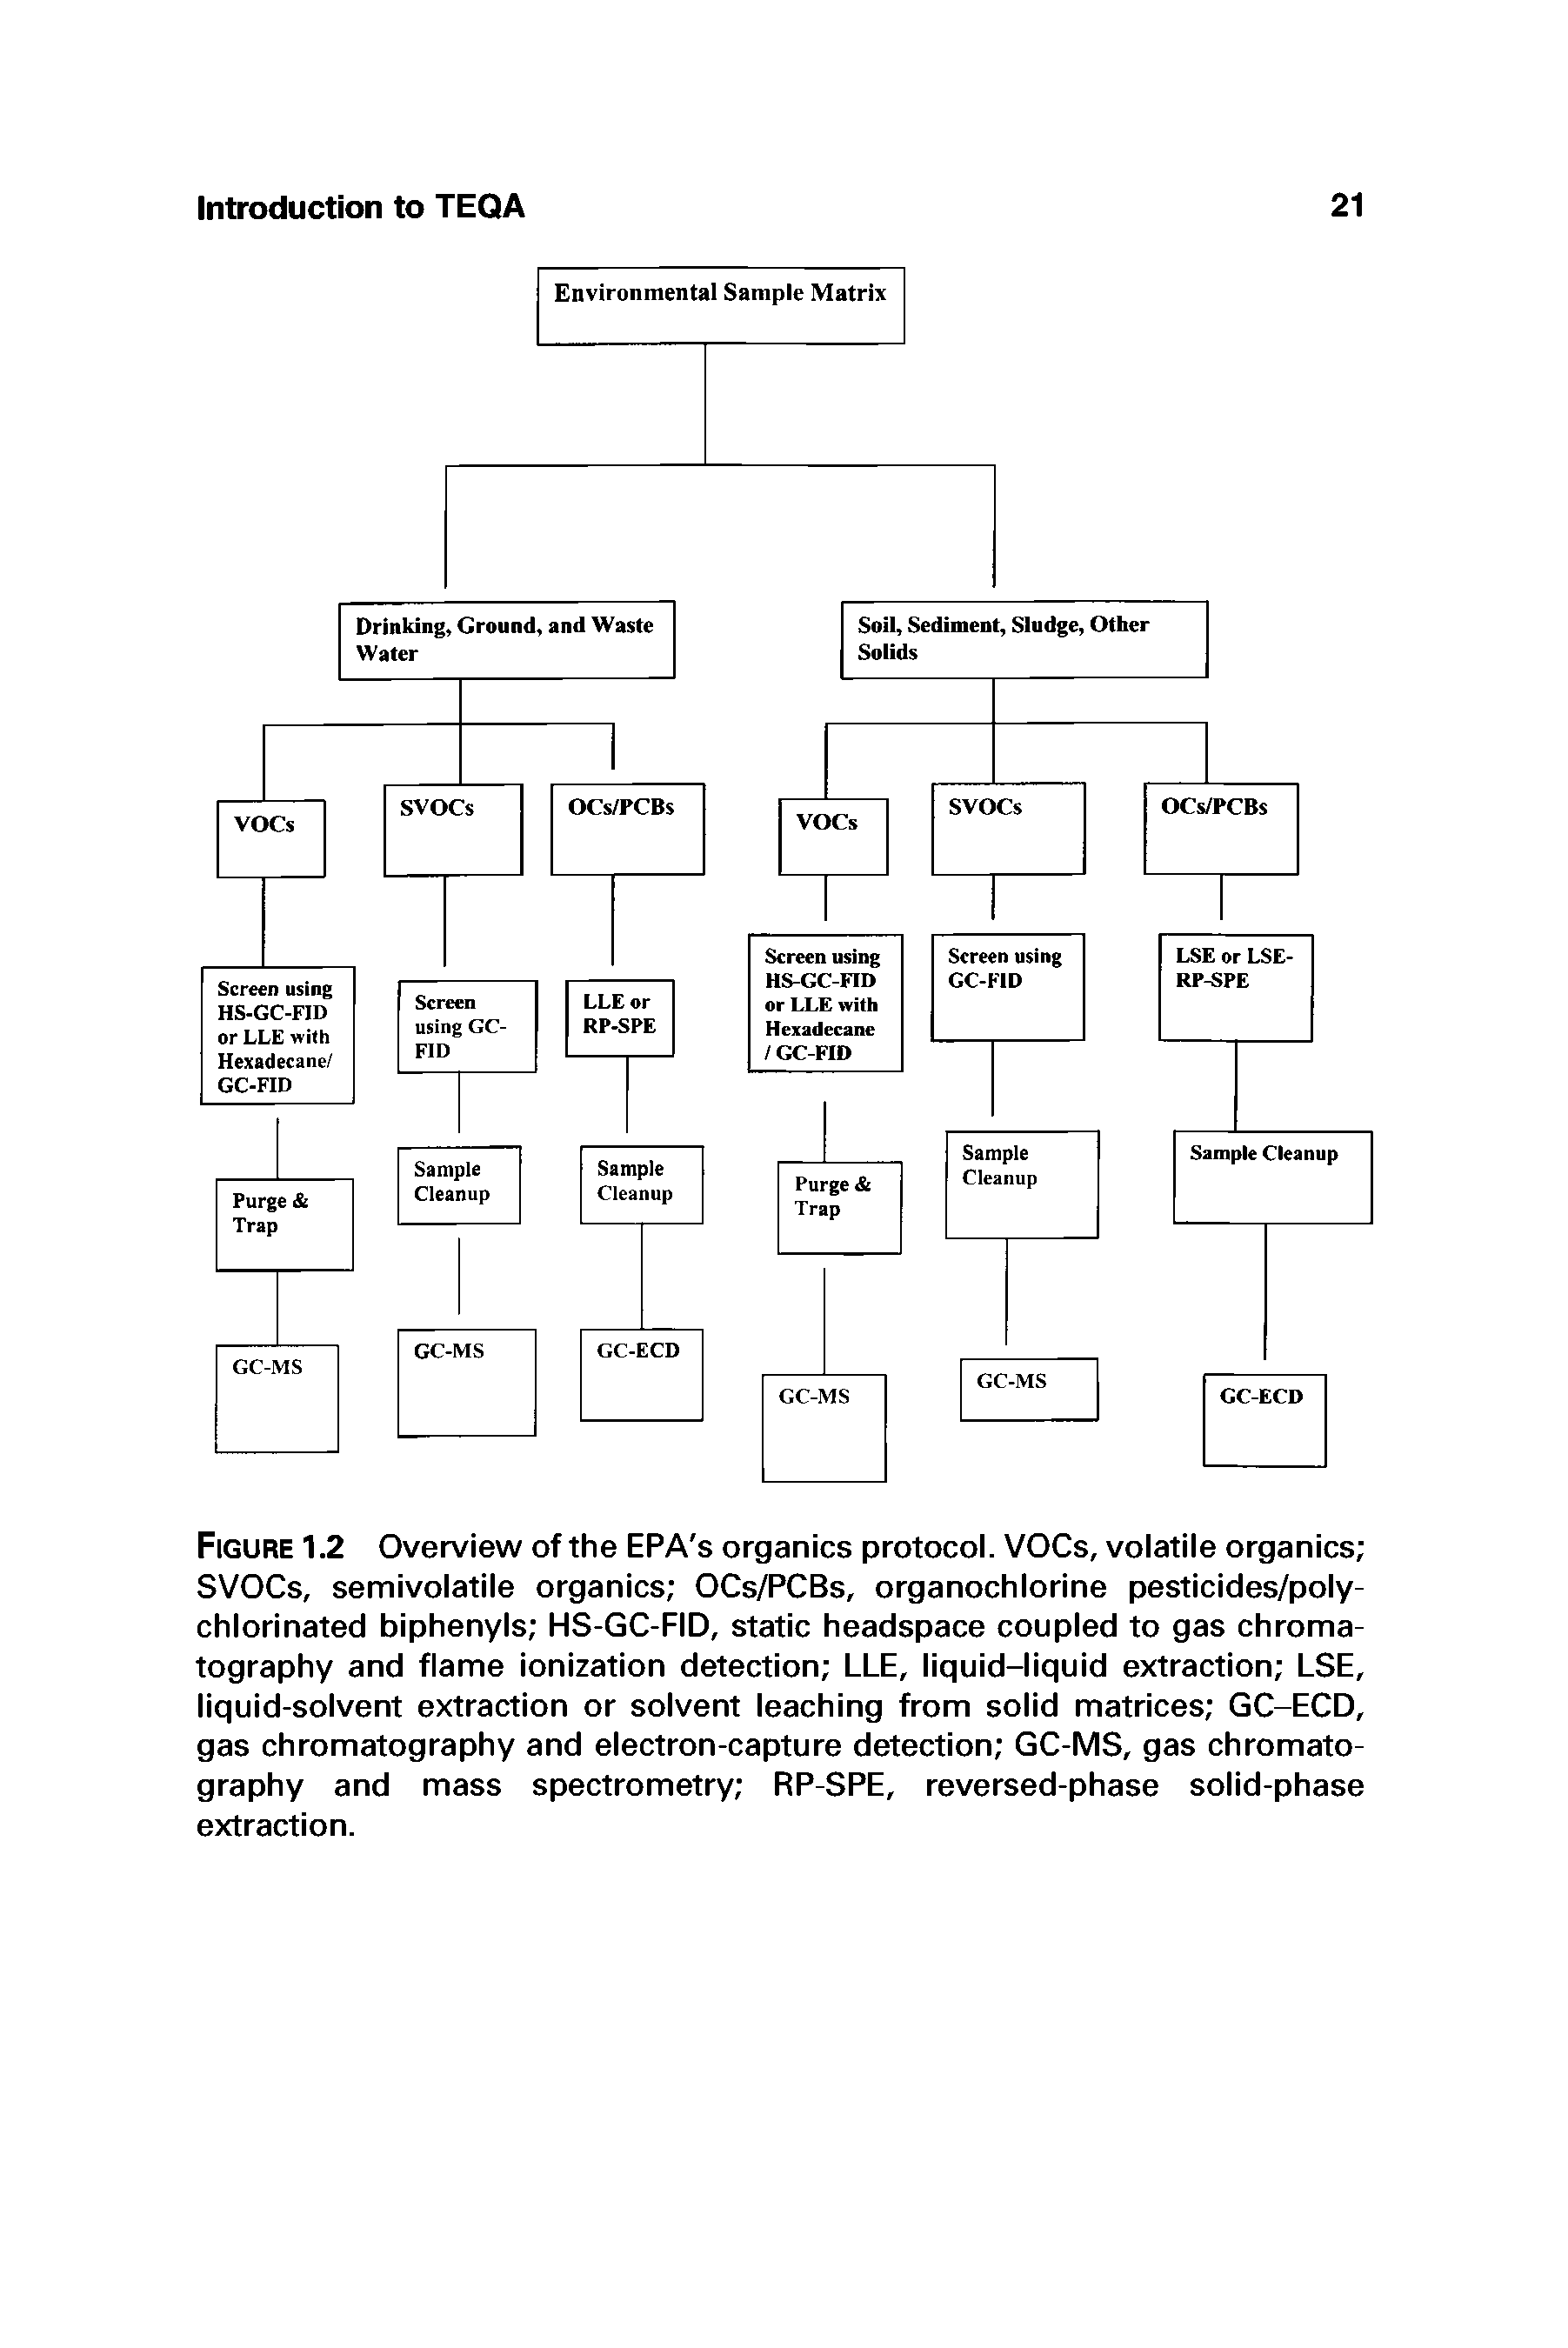 Figure 1.2 Overview of the EPA s organics protocol. VOCs, volatile organics SVOCs, semivolatile organics OCs/PCBs, organochlorine pesticides/poly-chlorinated biphenyls HS-GC-FID, static headspace coupled to gas chromatography and flame ionization detection LLE, liquid-liquid extraction LSE, liquid-solvent extraction or solvent leaching from solid matrices GC-ECD, gas chromatography and electron-capture detection GC-MS, gas chromatography and mass spectrometry RP-SPE, reversed-phase solid-phase extraction.